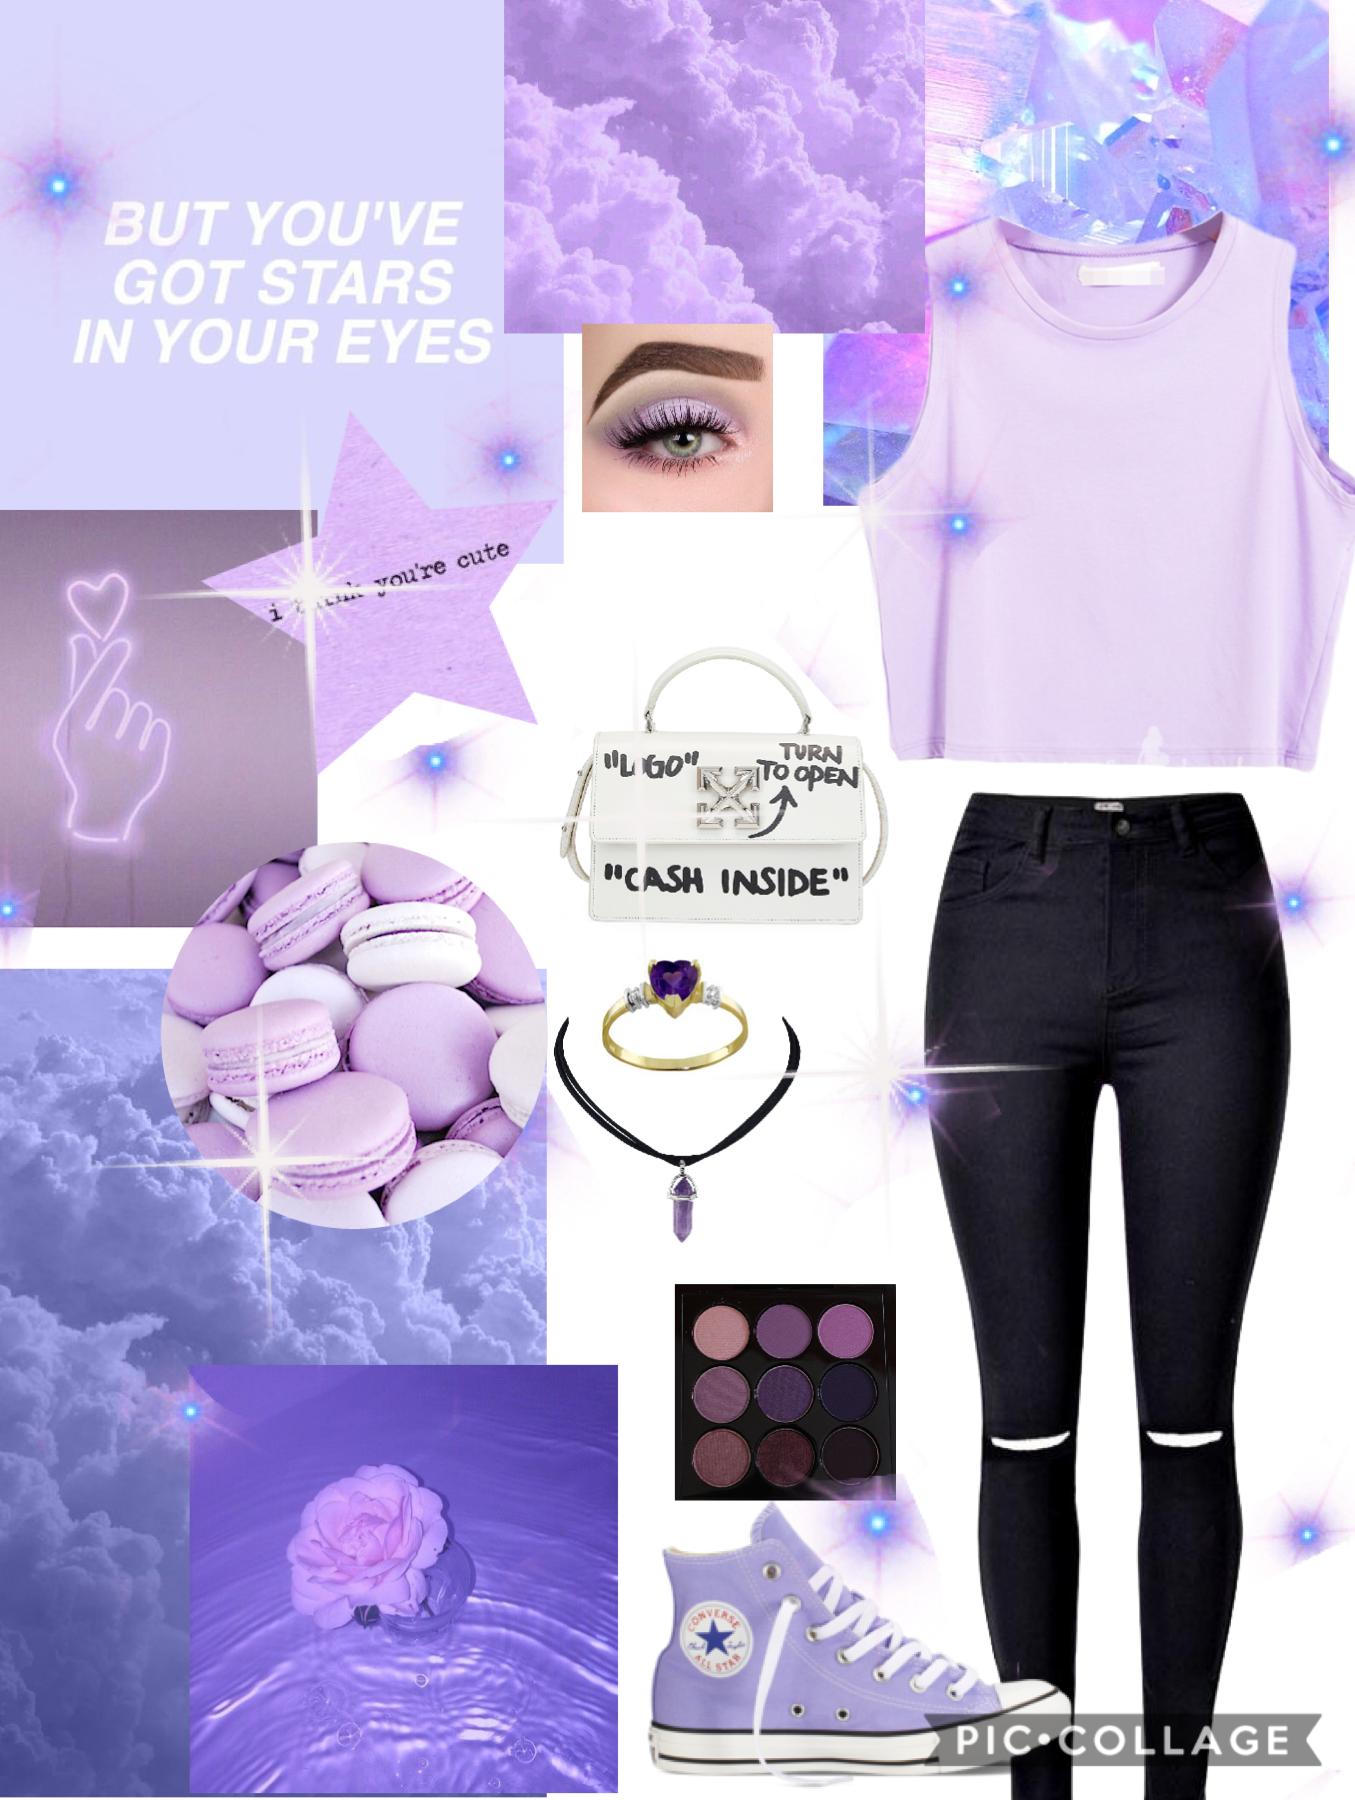 purple 💜


any likes or follows would be greatly appreciated ☺️

#purple #outfit #style #clothes #periwinkle #cloud #aesthetic #makeup #amethyst #macaron #converse #collage #piccollage #thanks #aesthetic #color 